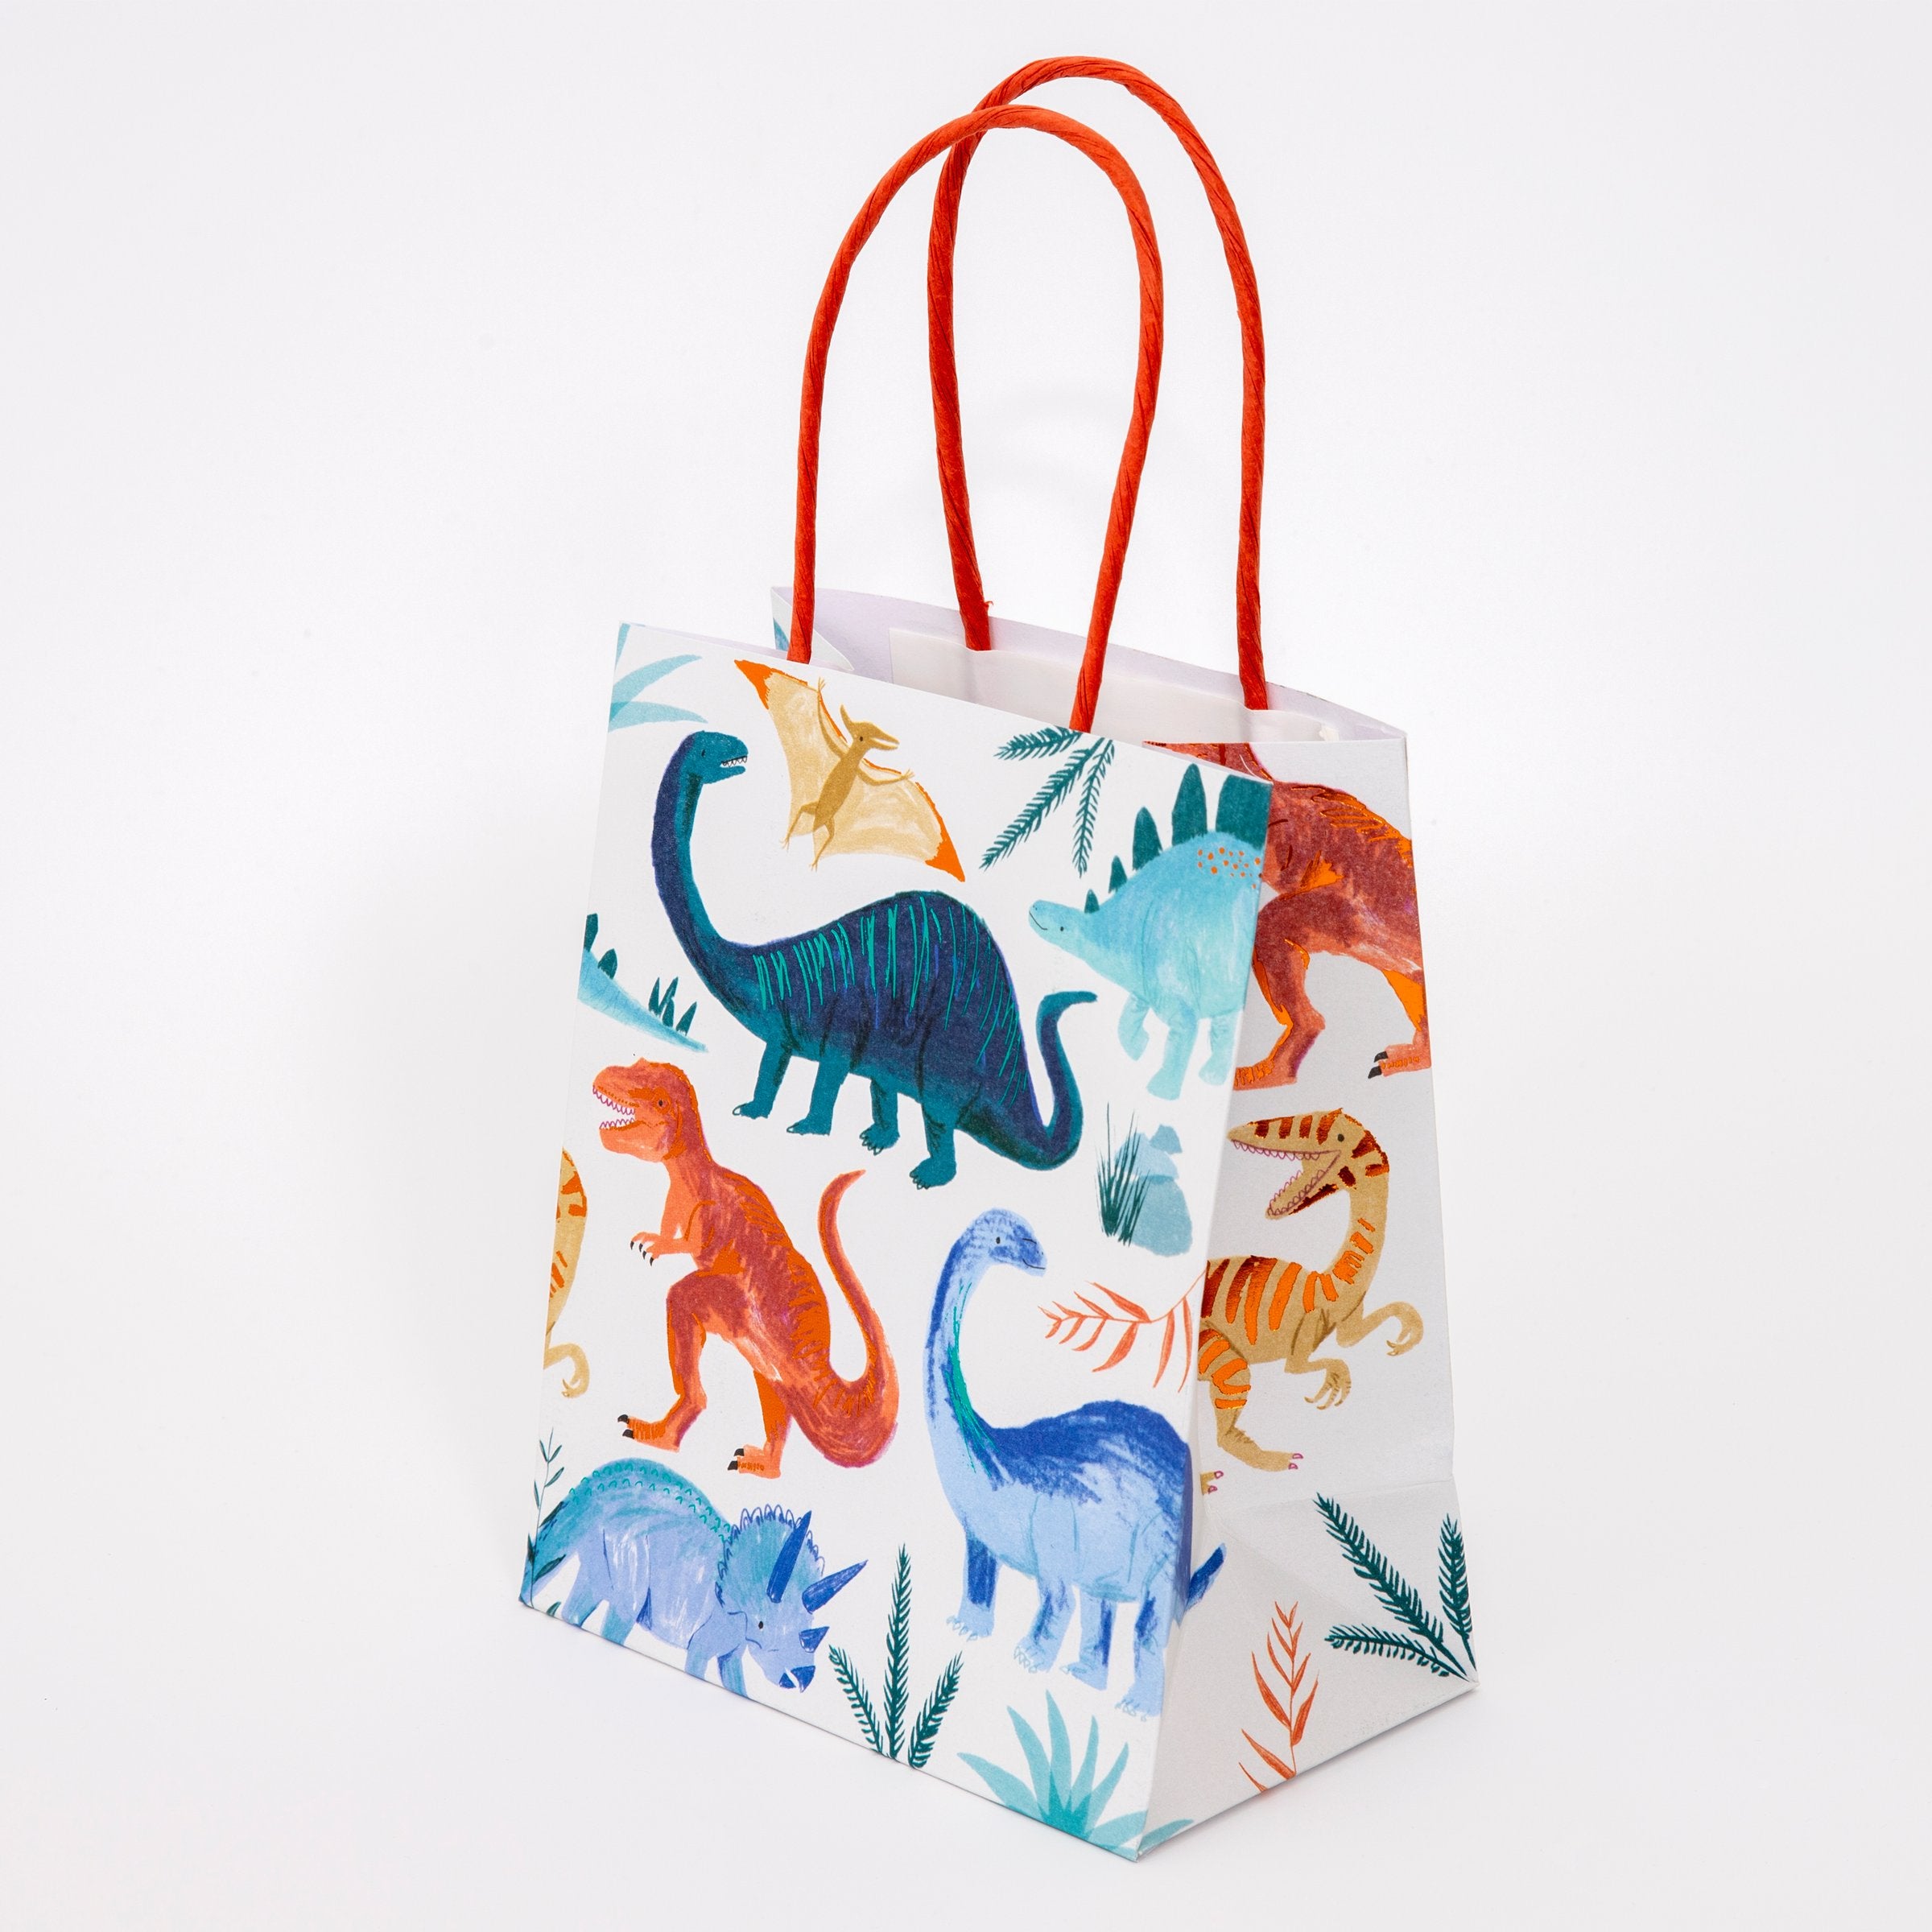 Our colourful dinosaur goodie bags, with a twisted paper handle, look amazing.